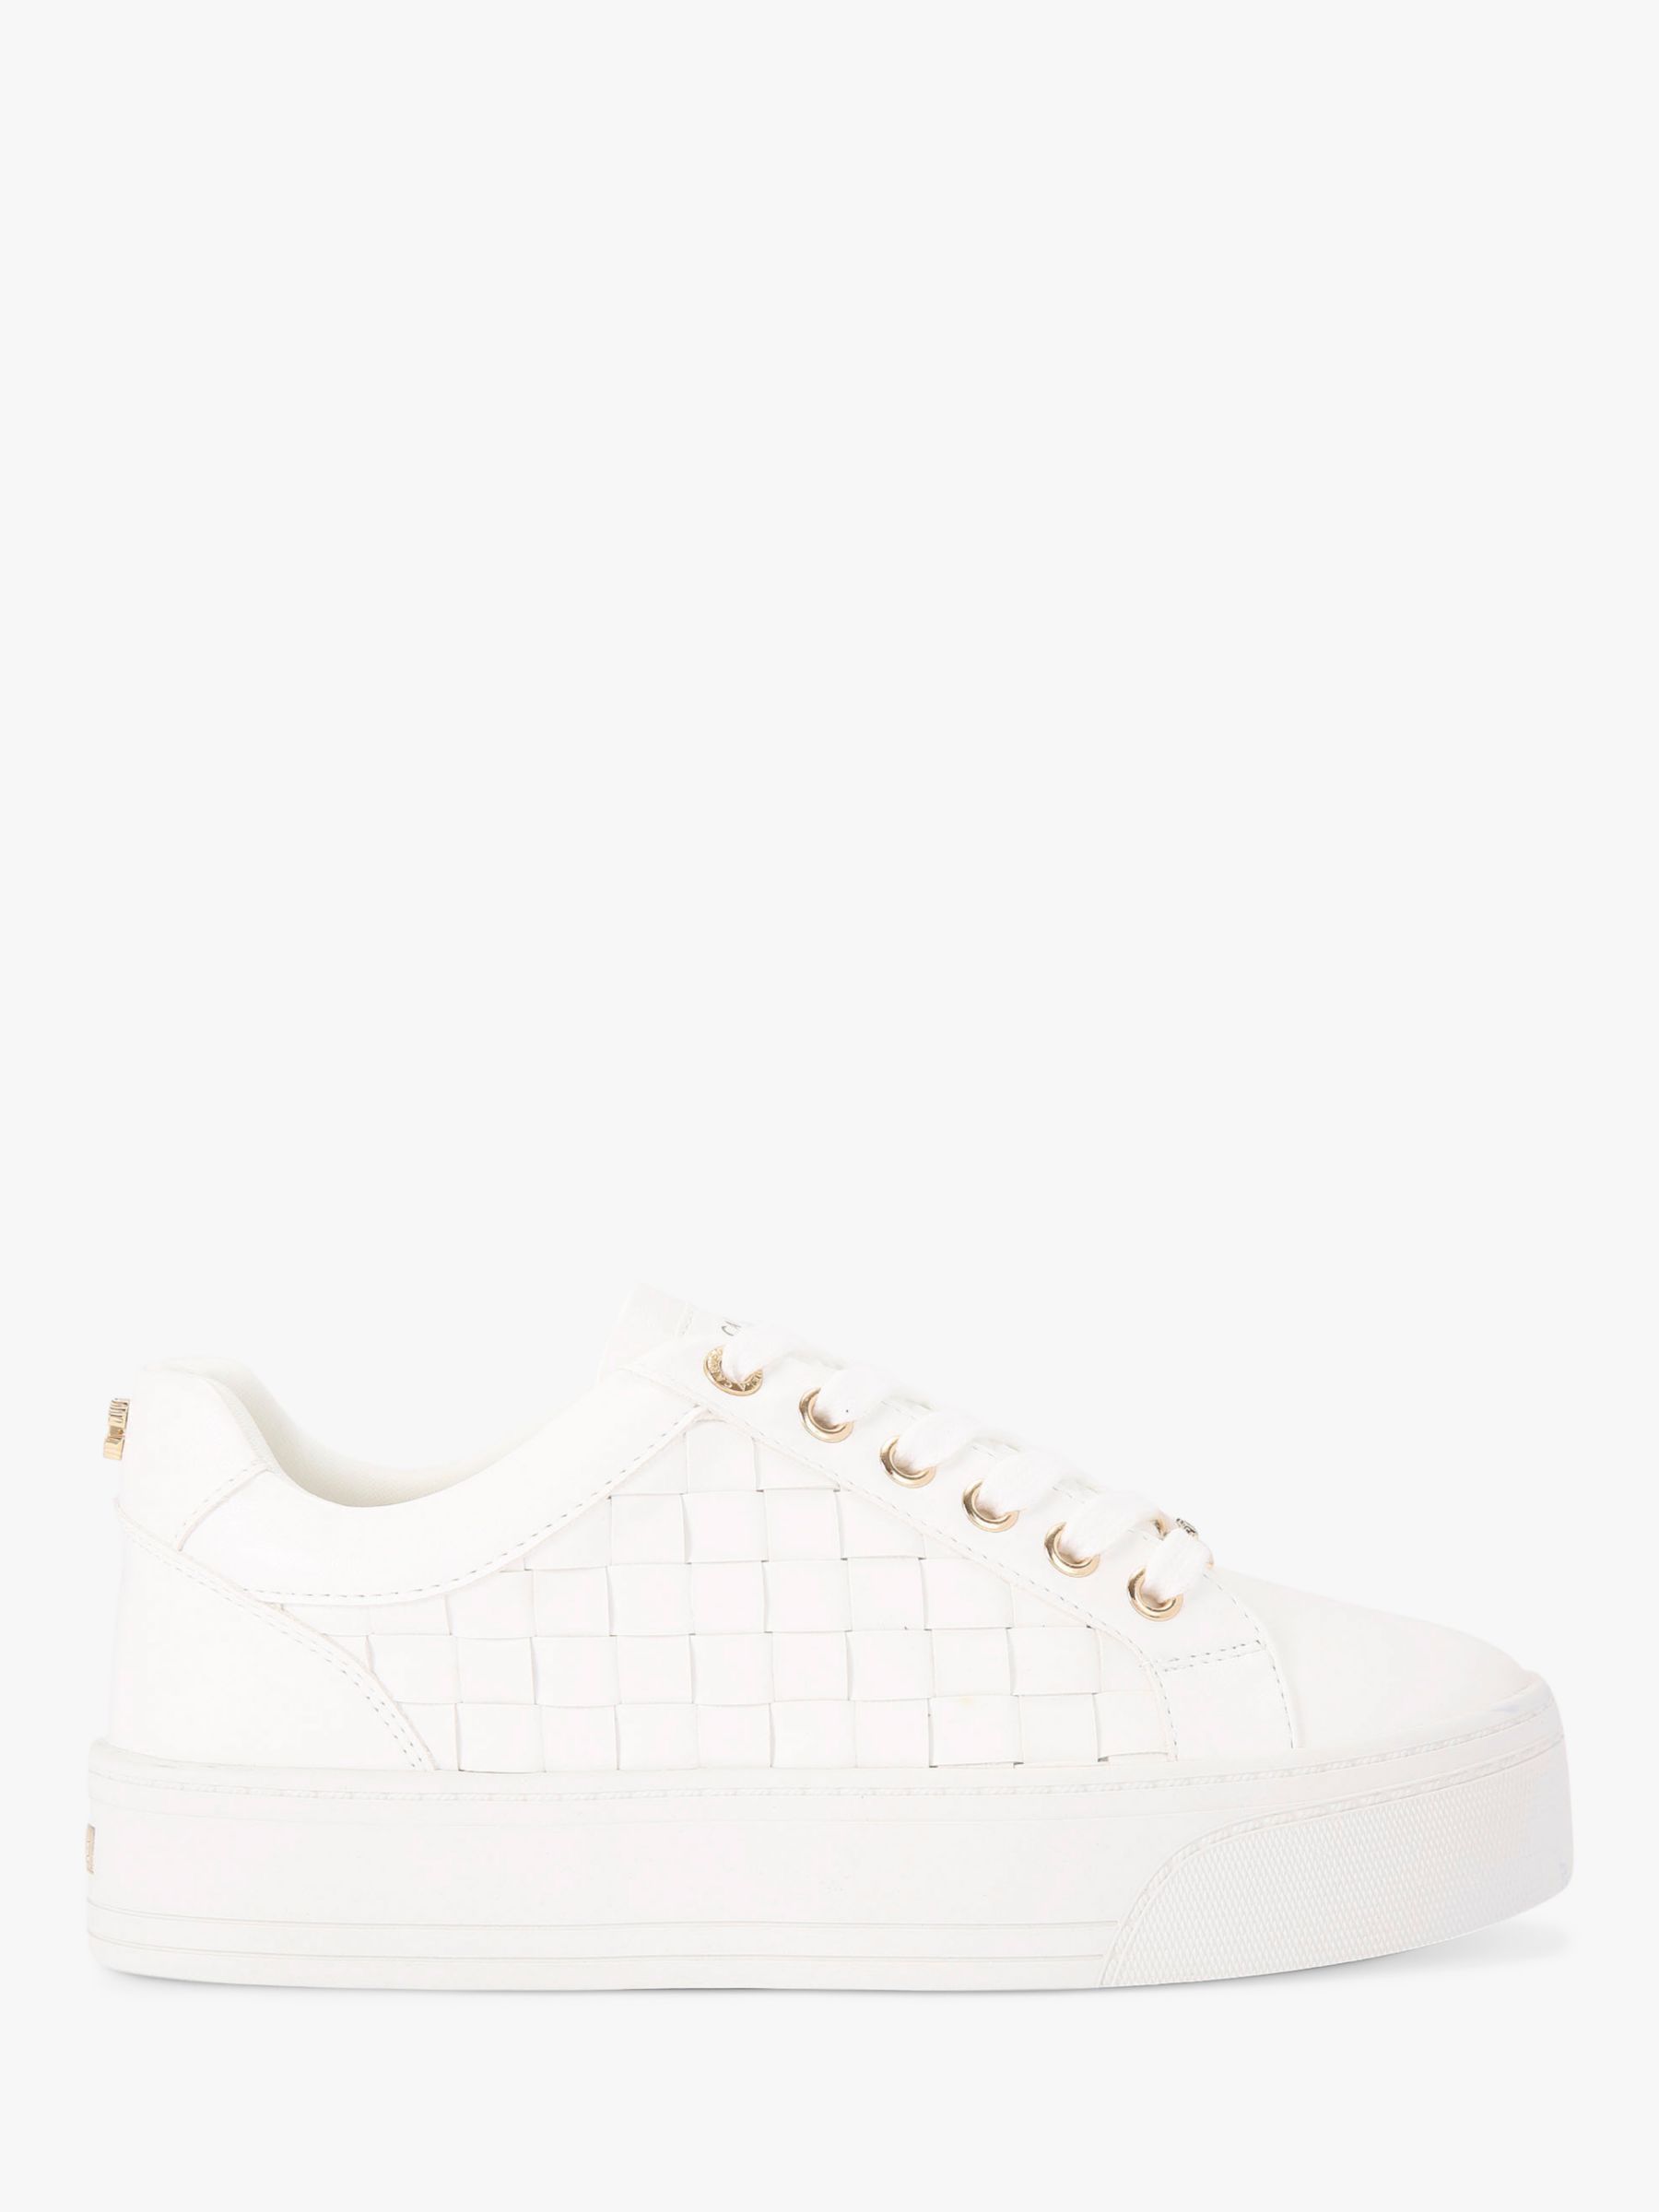 Carvela Checker Trainers, White at John Lewis & Partners